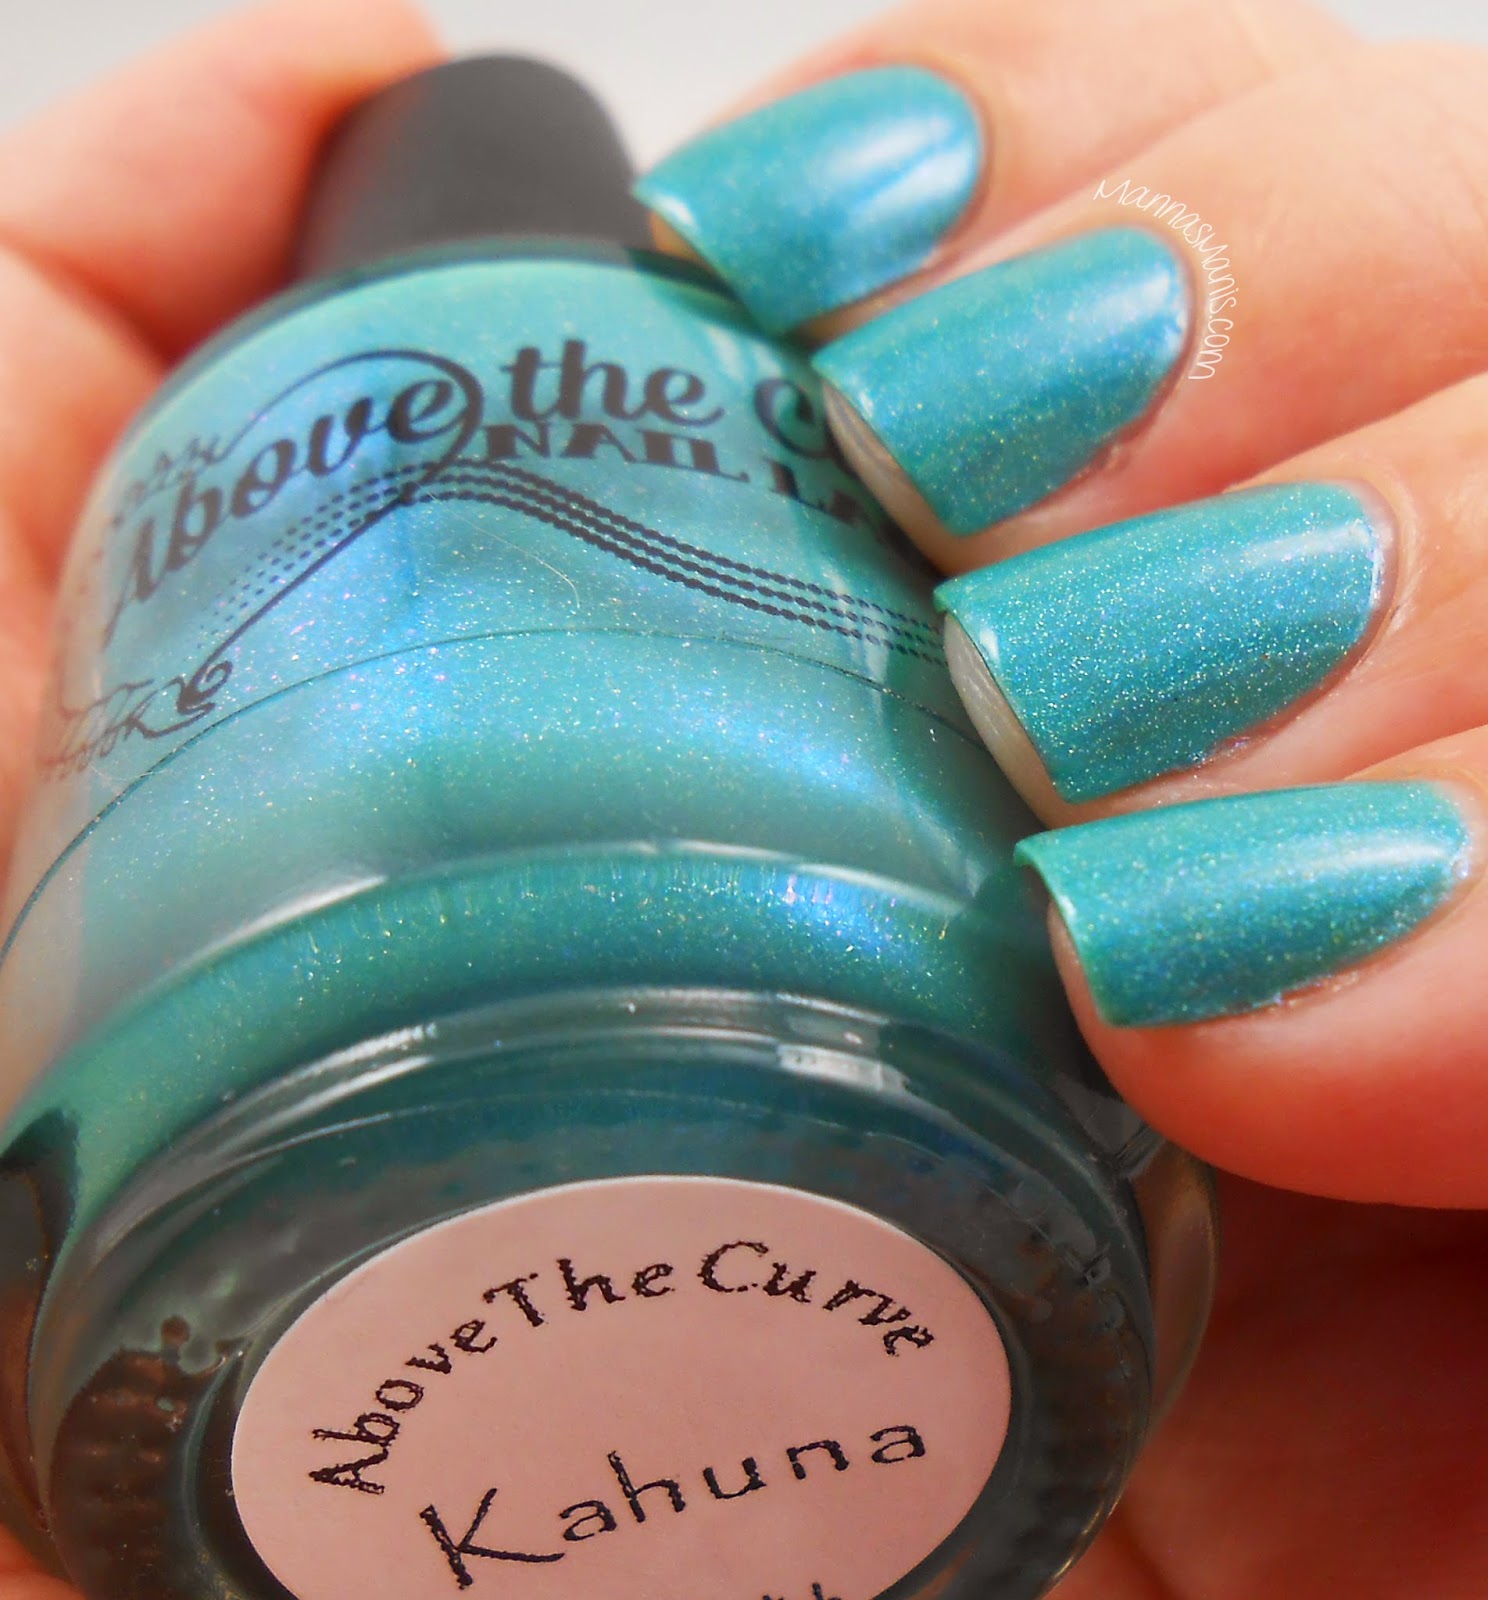 above the curve kahuna, teal holographic indie nail polish